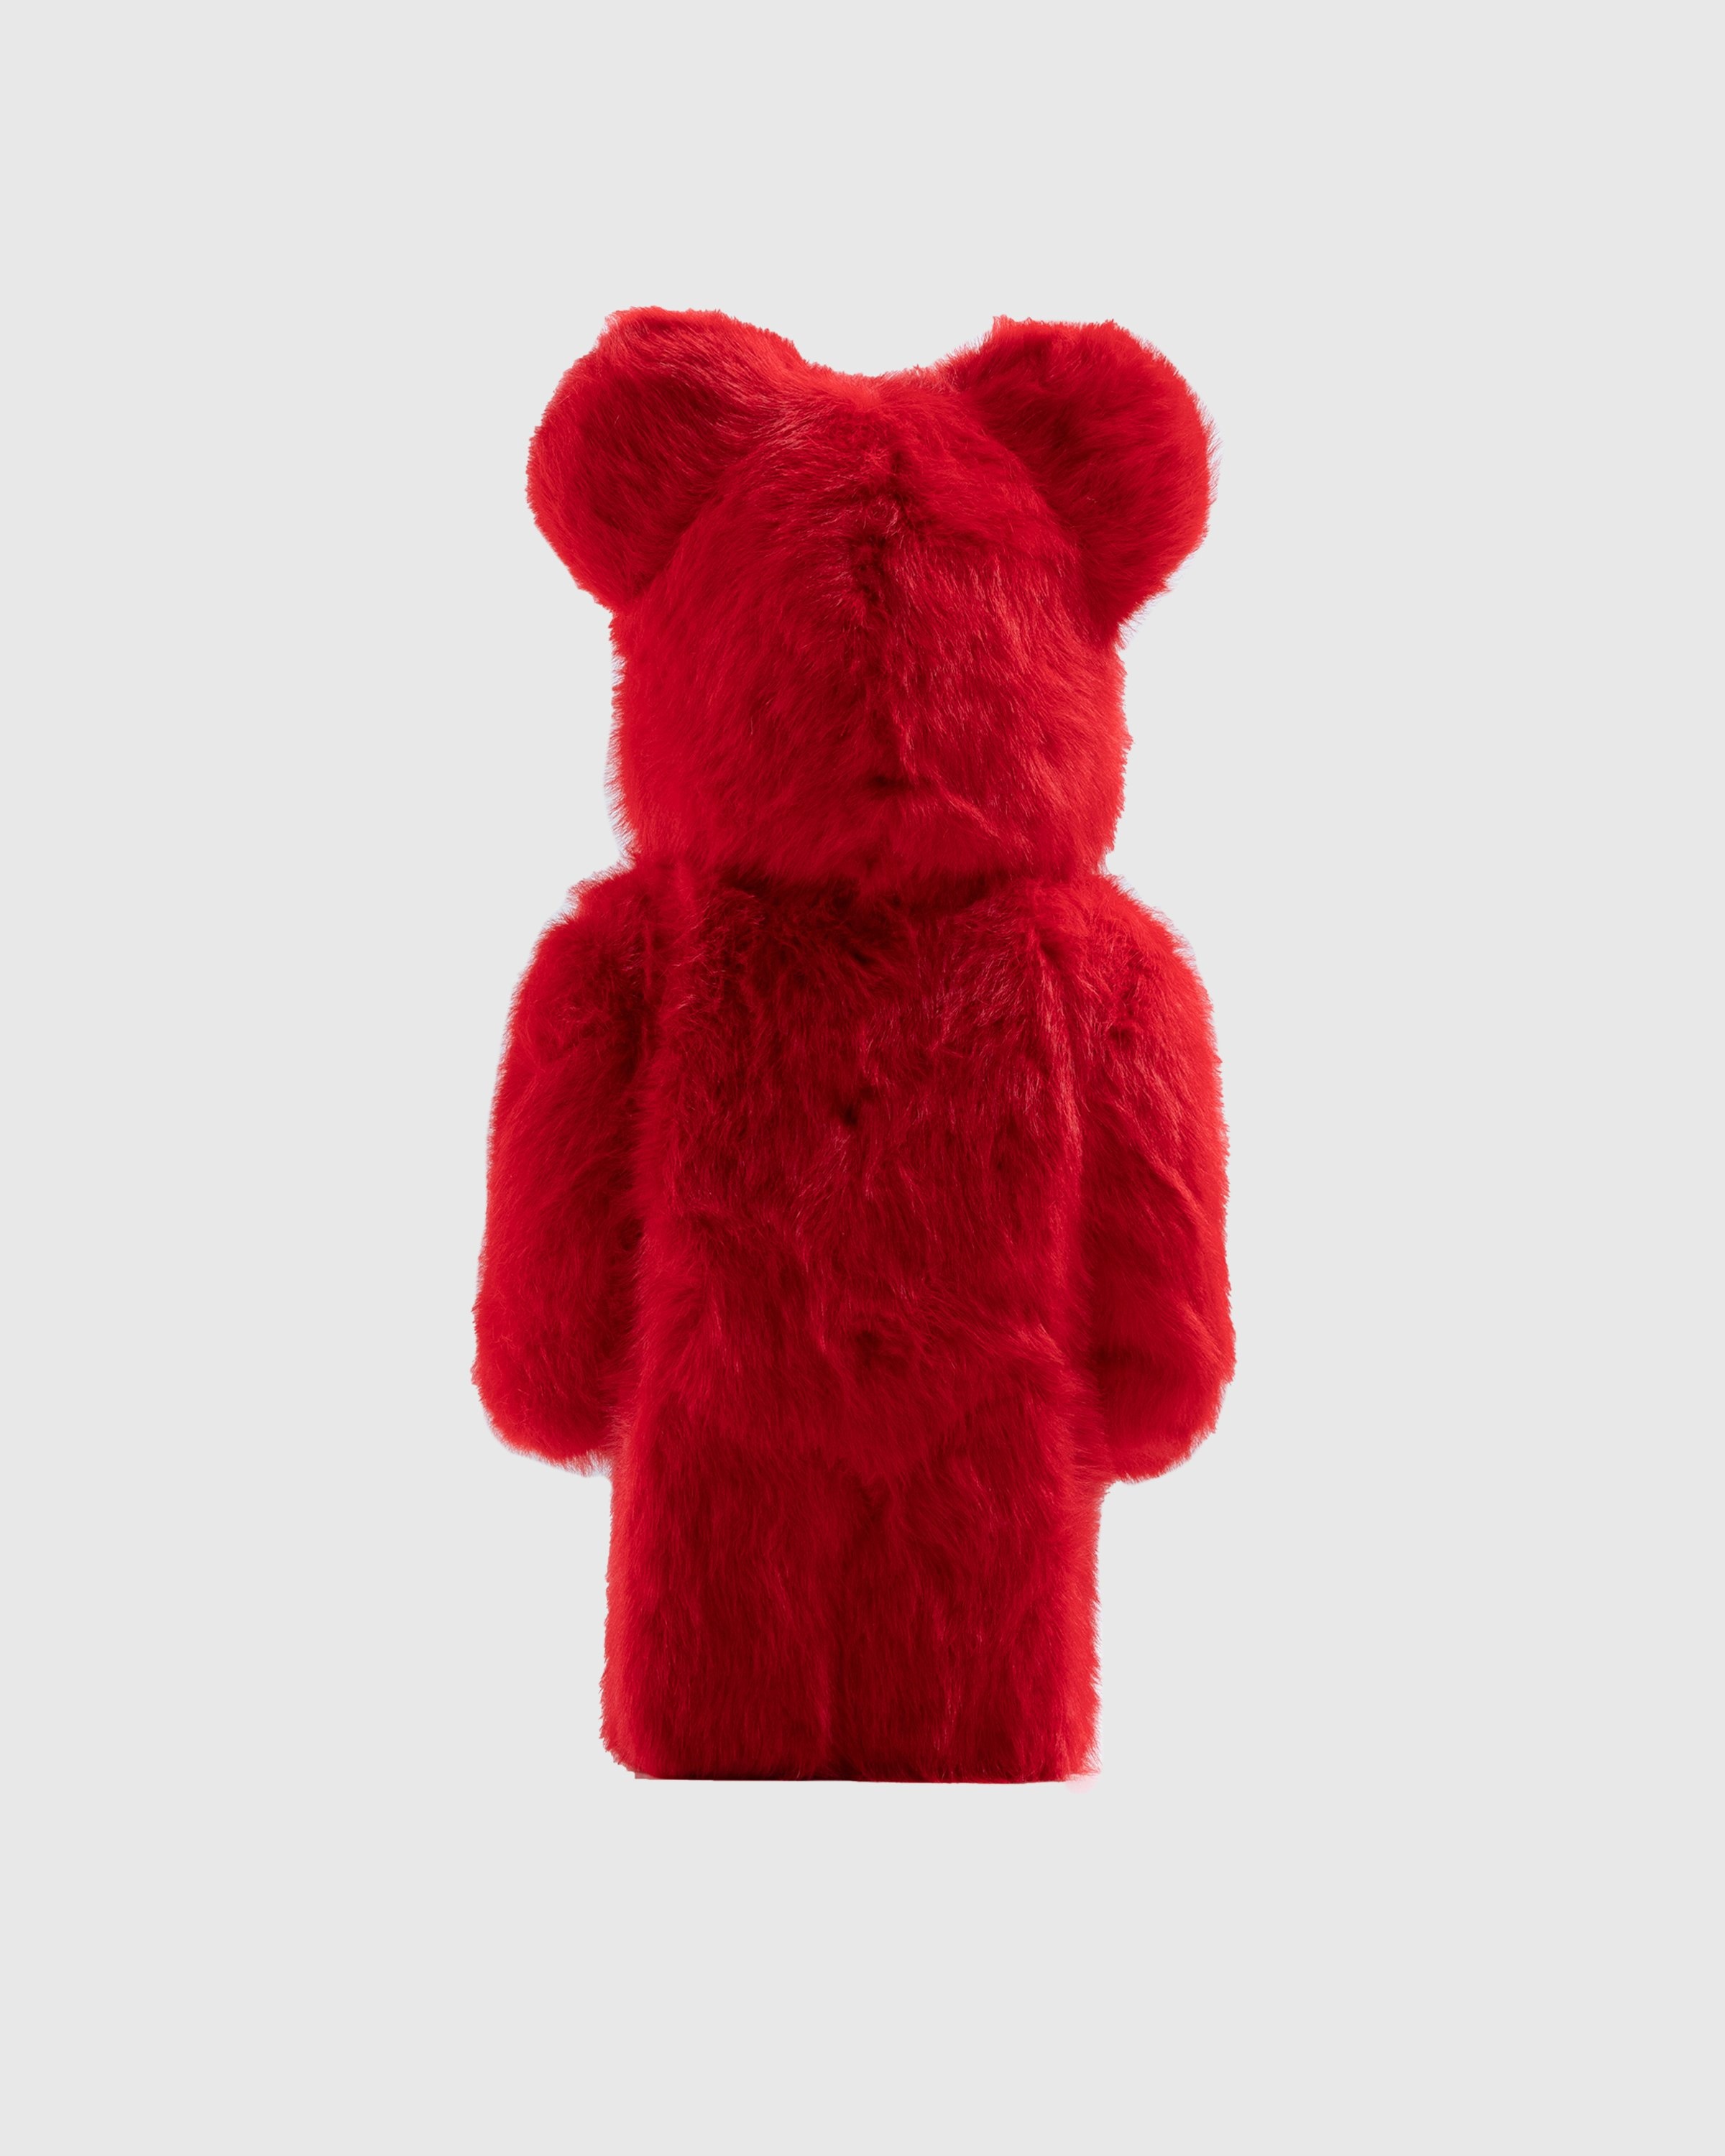 Medicom – Be@rbrick Elmo Costume Version 2 1000％ Red - Art & Collectibles - Red - Image 3